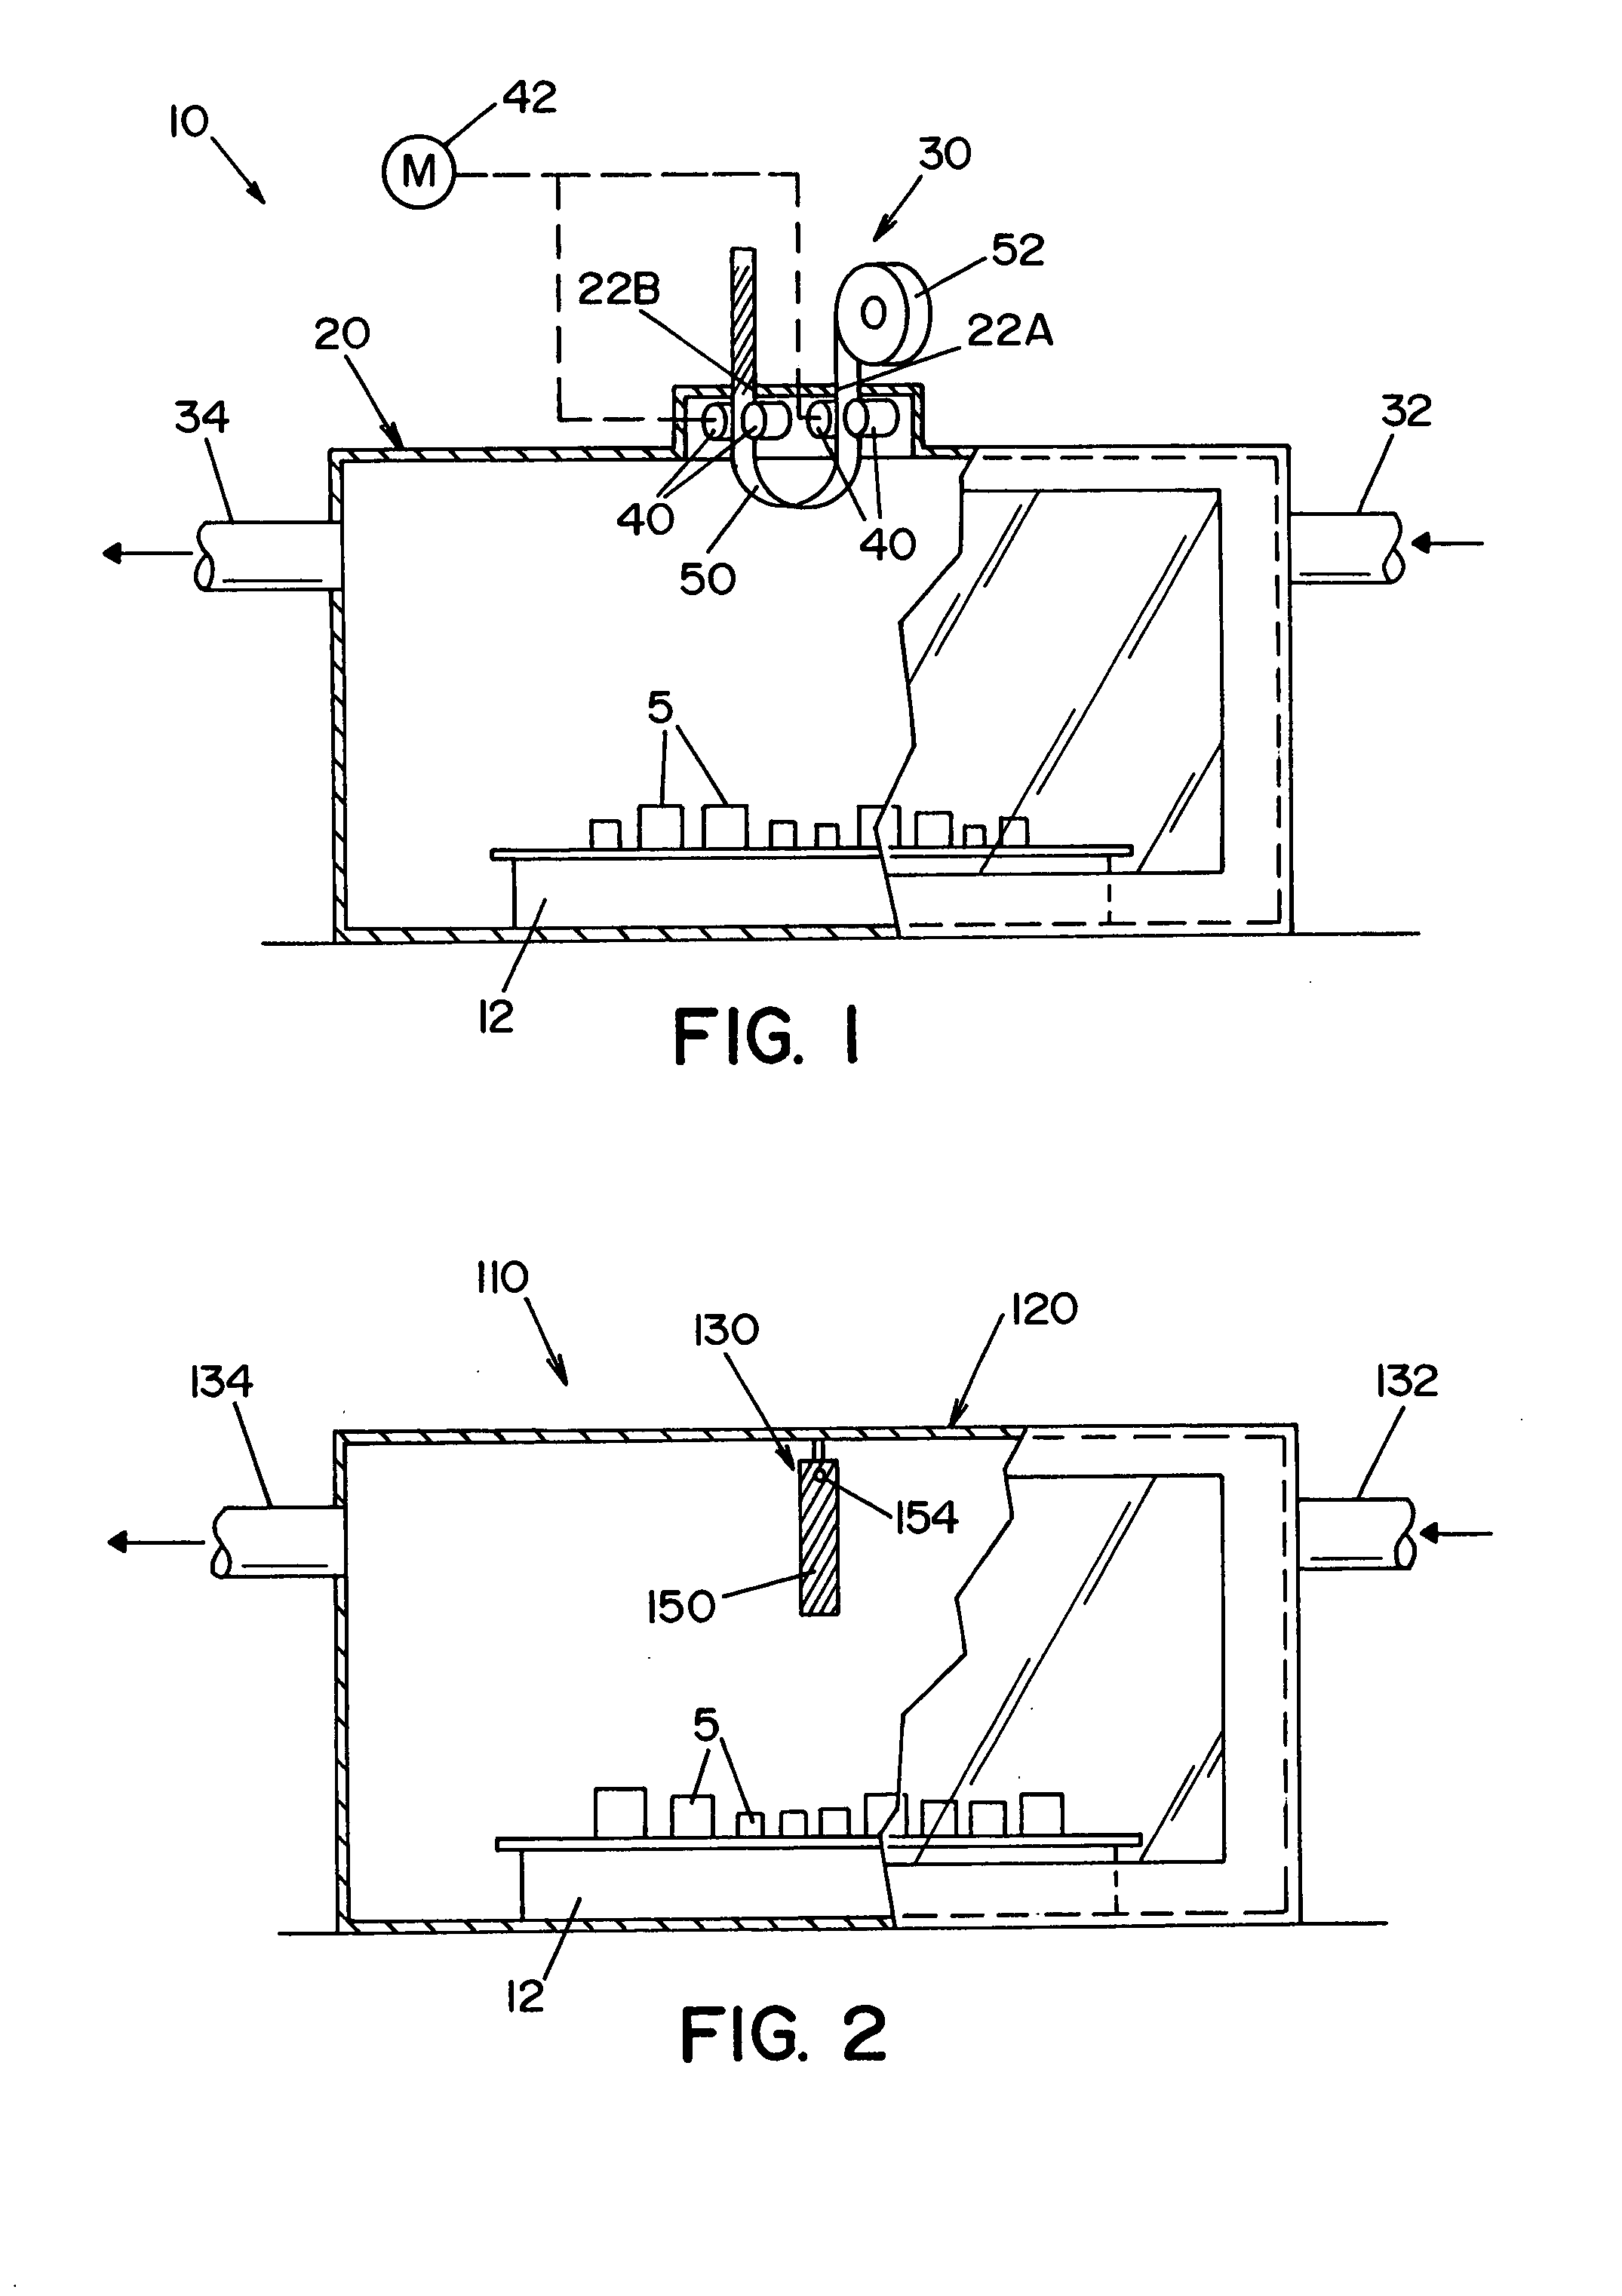 Visual detector for vaporized hydrogen peroxide